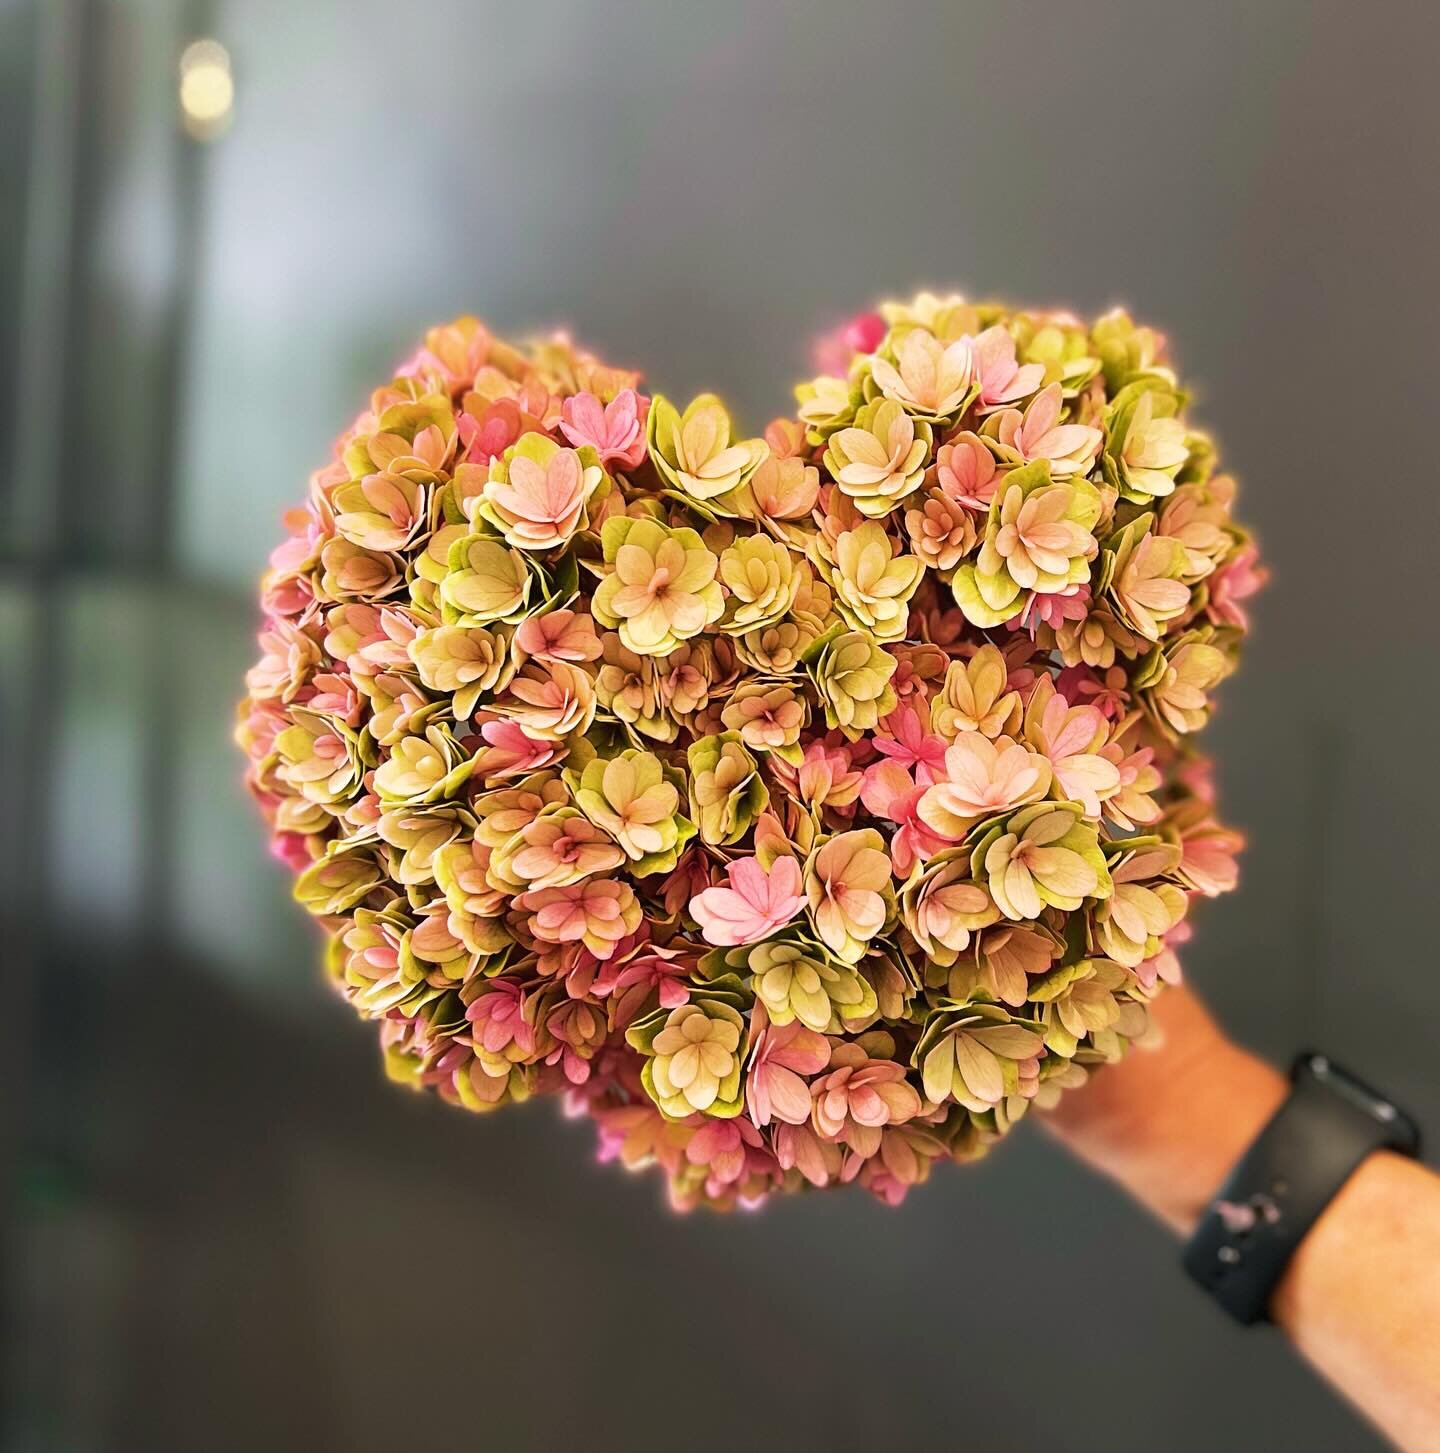 ❤️In the shape of a heart even the flowers know Valentine&rsquo;s Day is coming up ❤️

‼️Get your orders in soon‼️
.
.
.
#valantinesday #hydrangeas #love #loveintheair #flowersbykathleenkelly #smallbusiness #floweshop #flowers #shoplocal #shoplocaldi